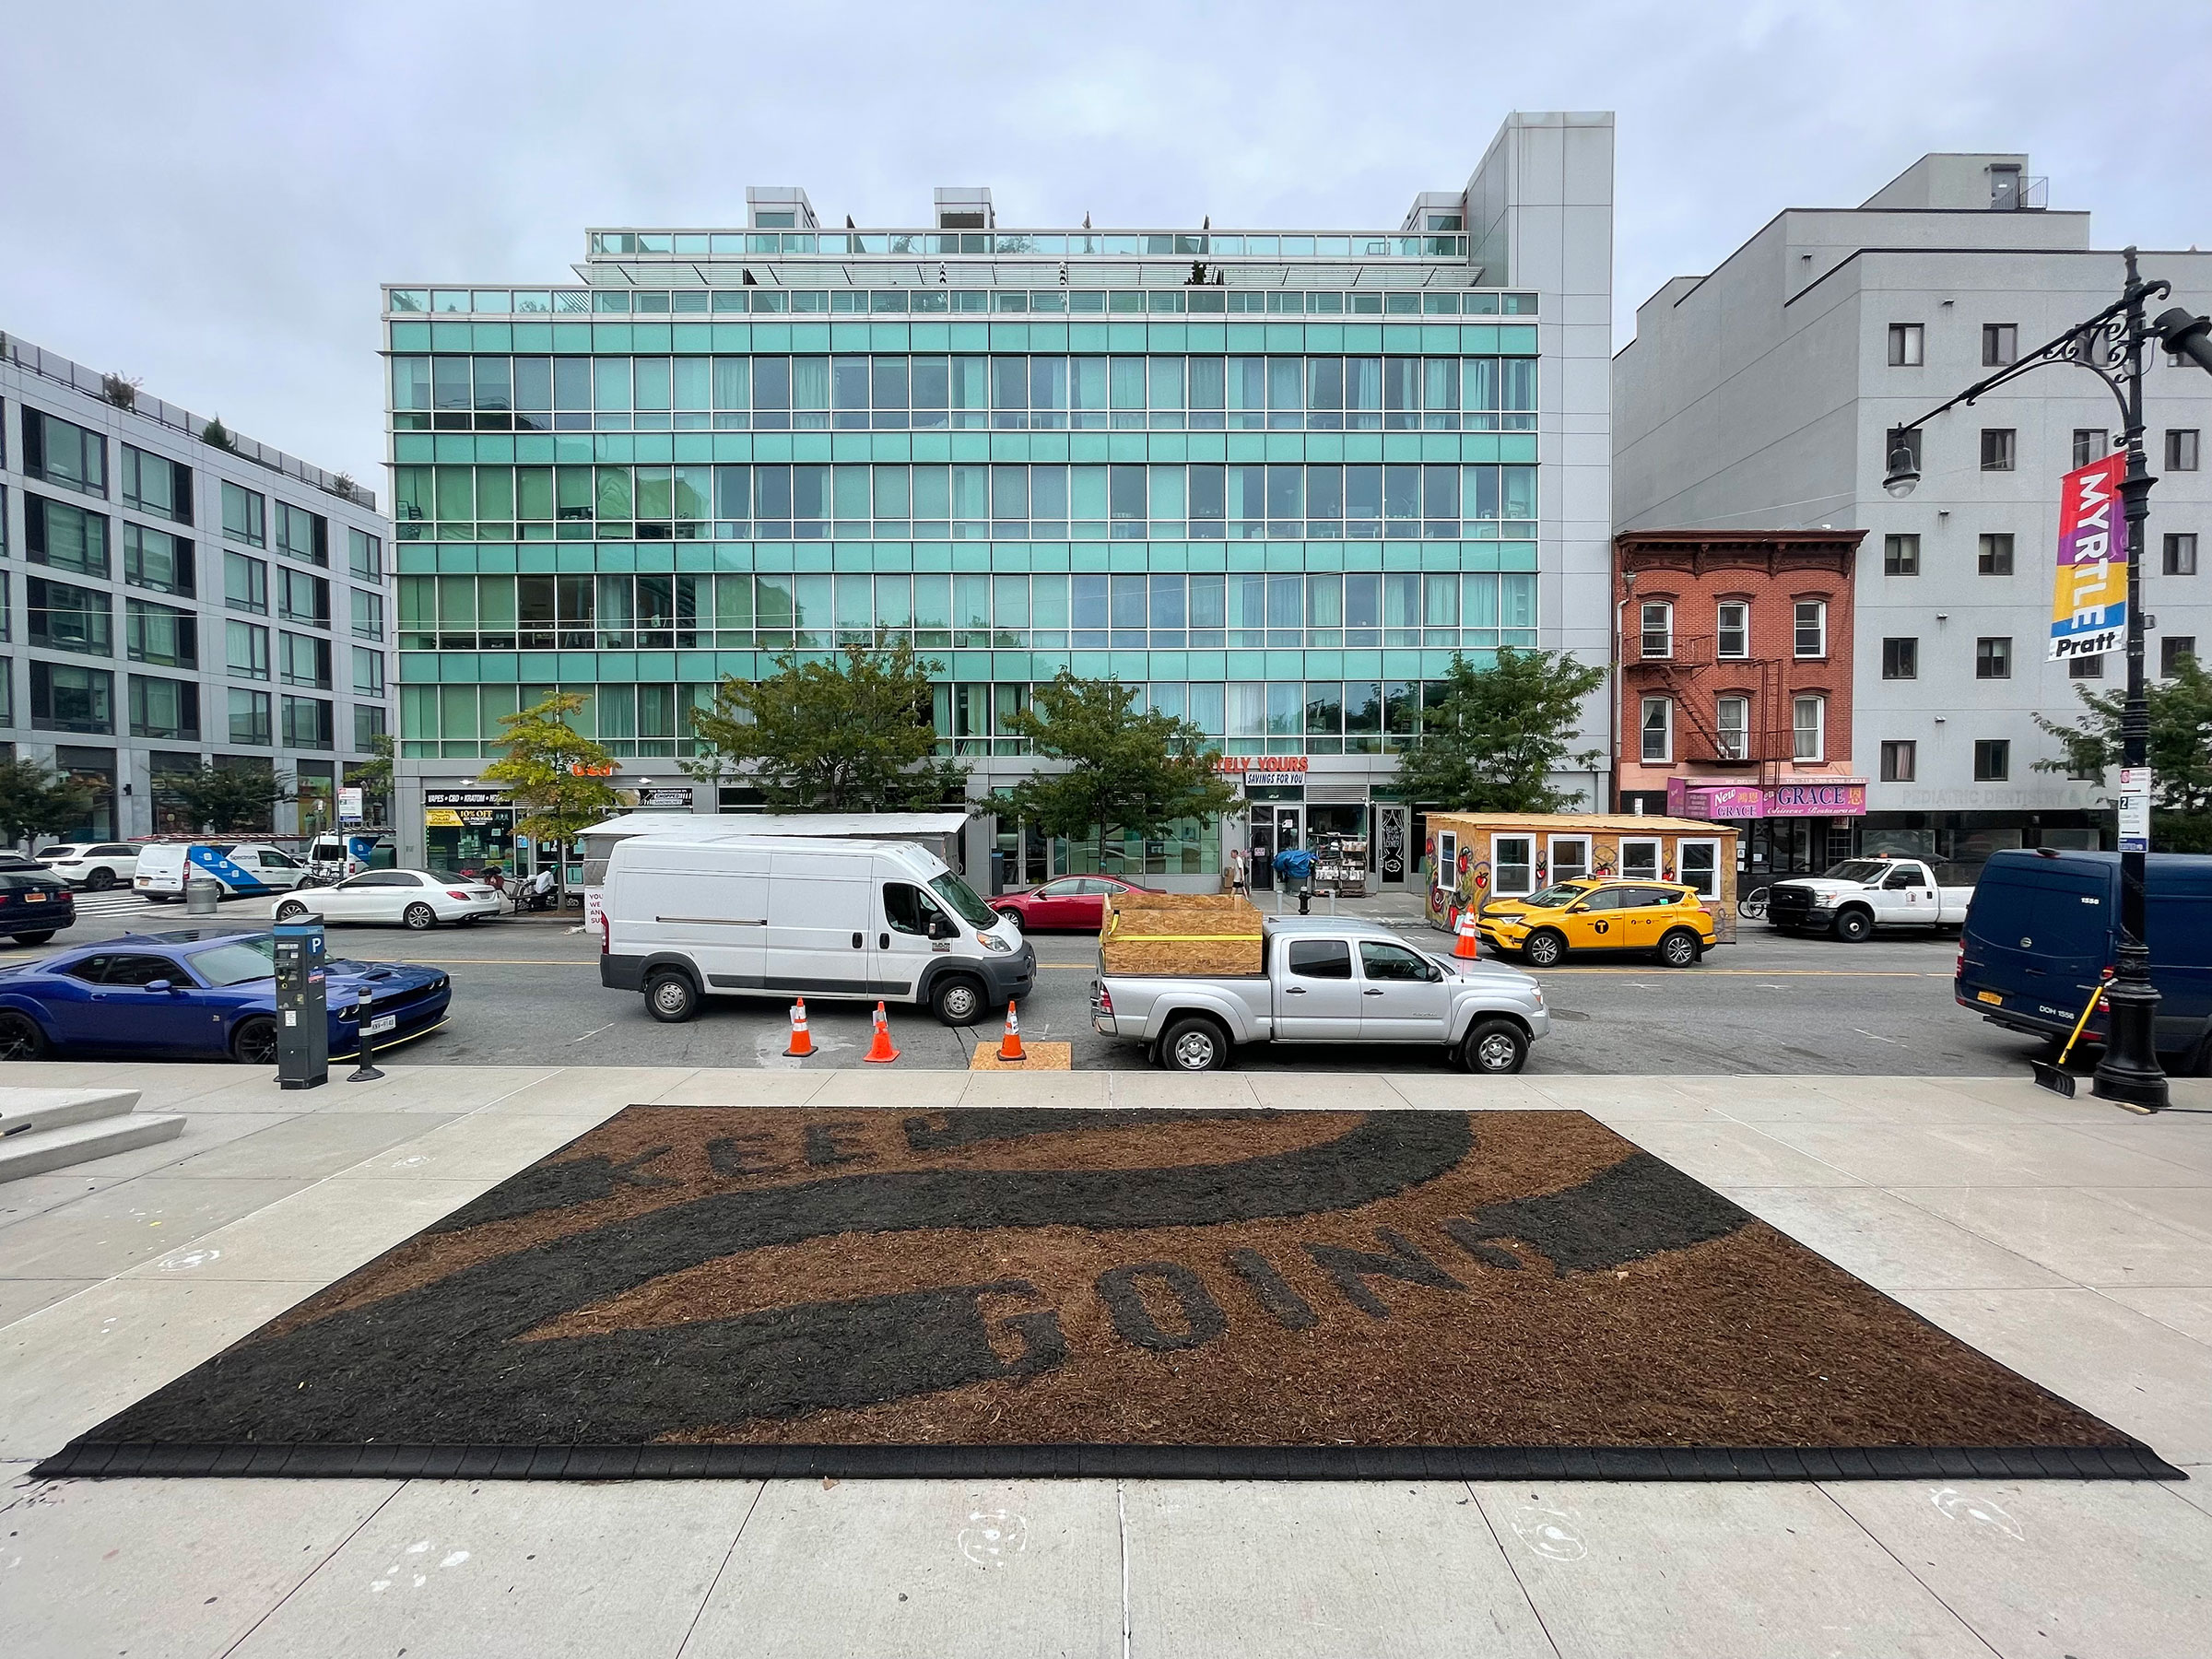 The “Mulch Mural” on Myrtle Avenue